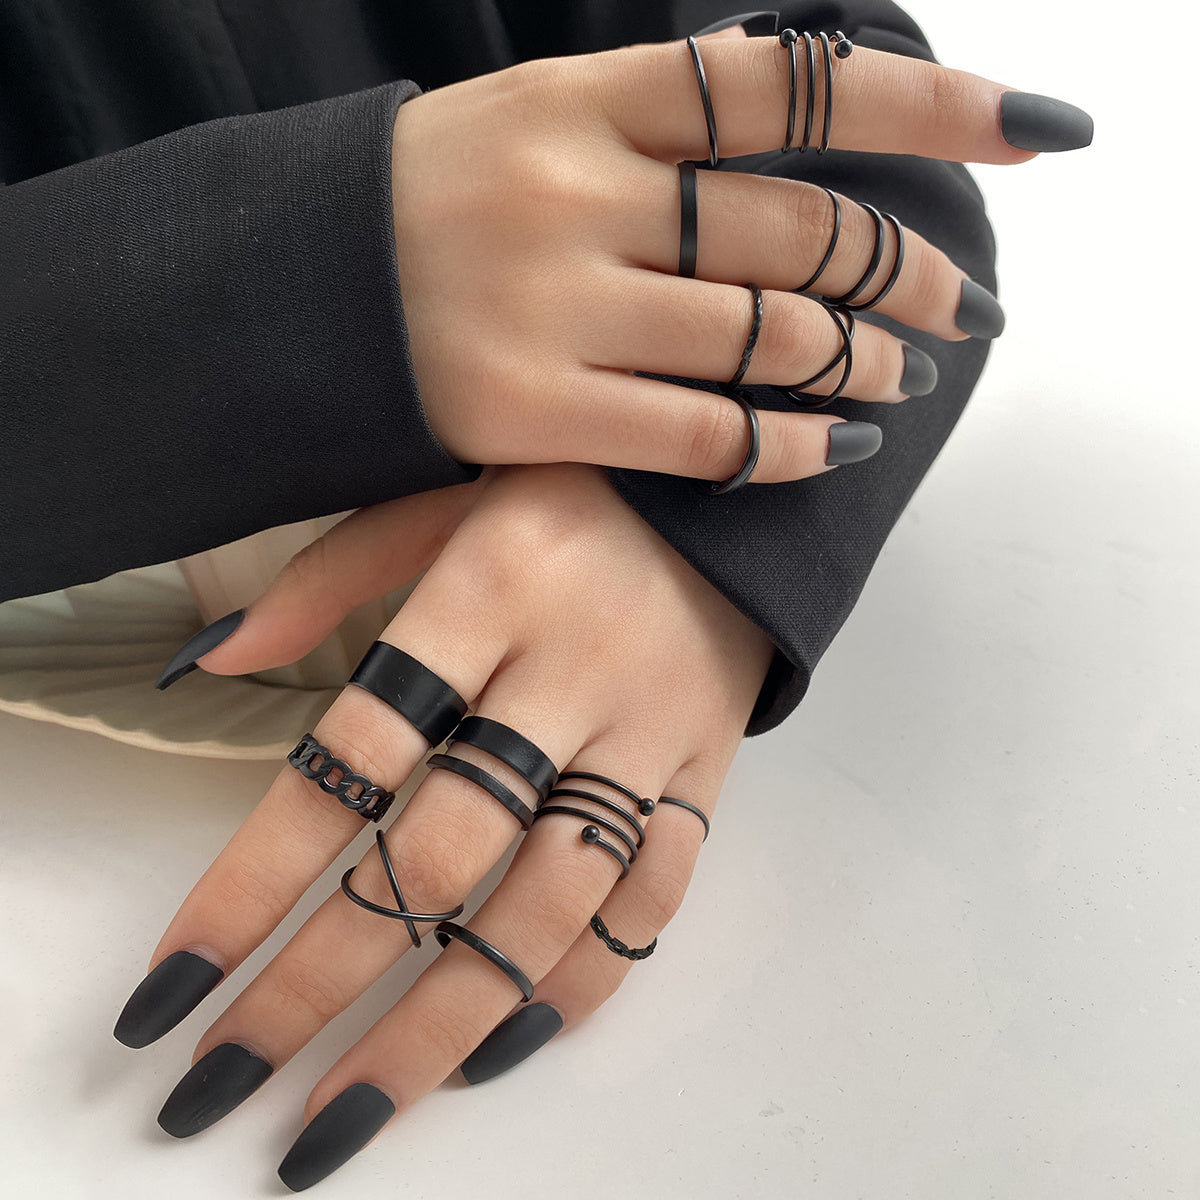 16pcs Set Women's Fashion Jewelry: Upgrade Your Look with a Stylish Geometric Surplice Ring!